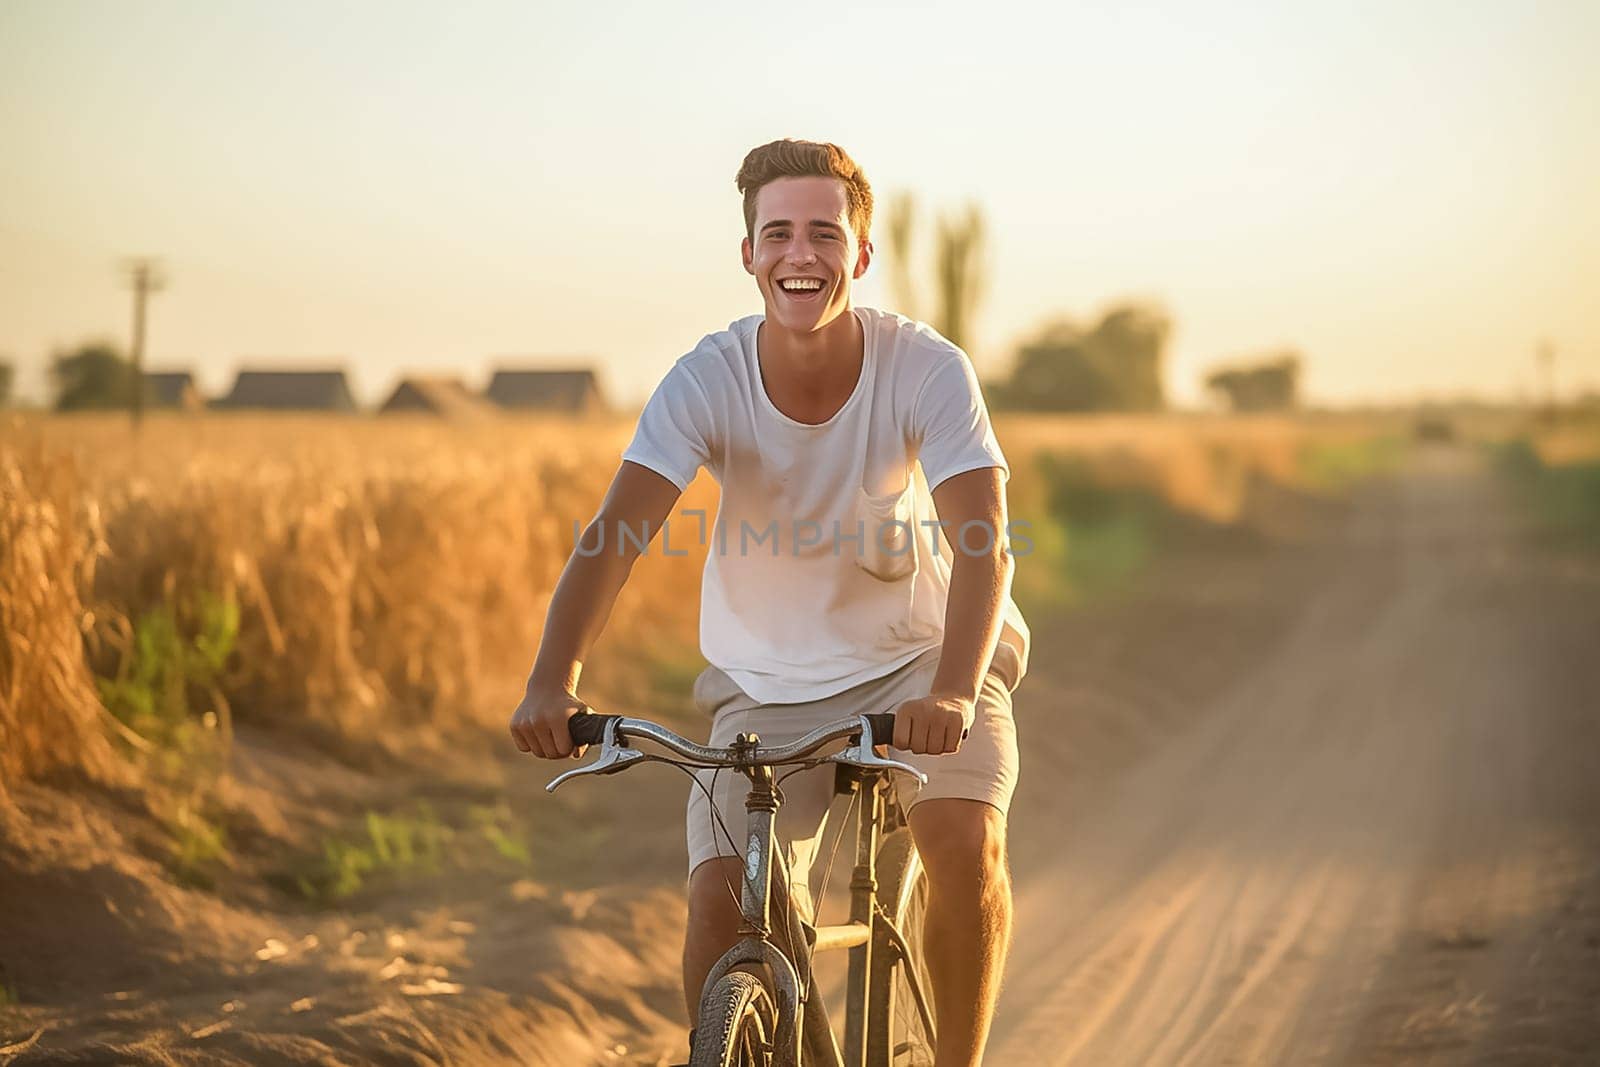 A young European man rides a bicycle along a country road past a wheat field, smiles happily and greets the dawn.